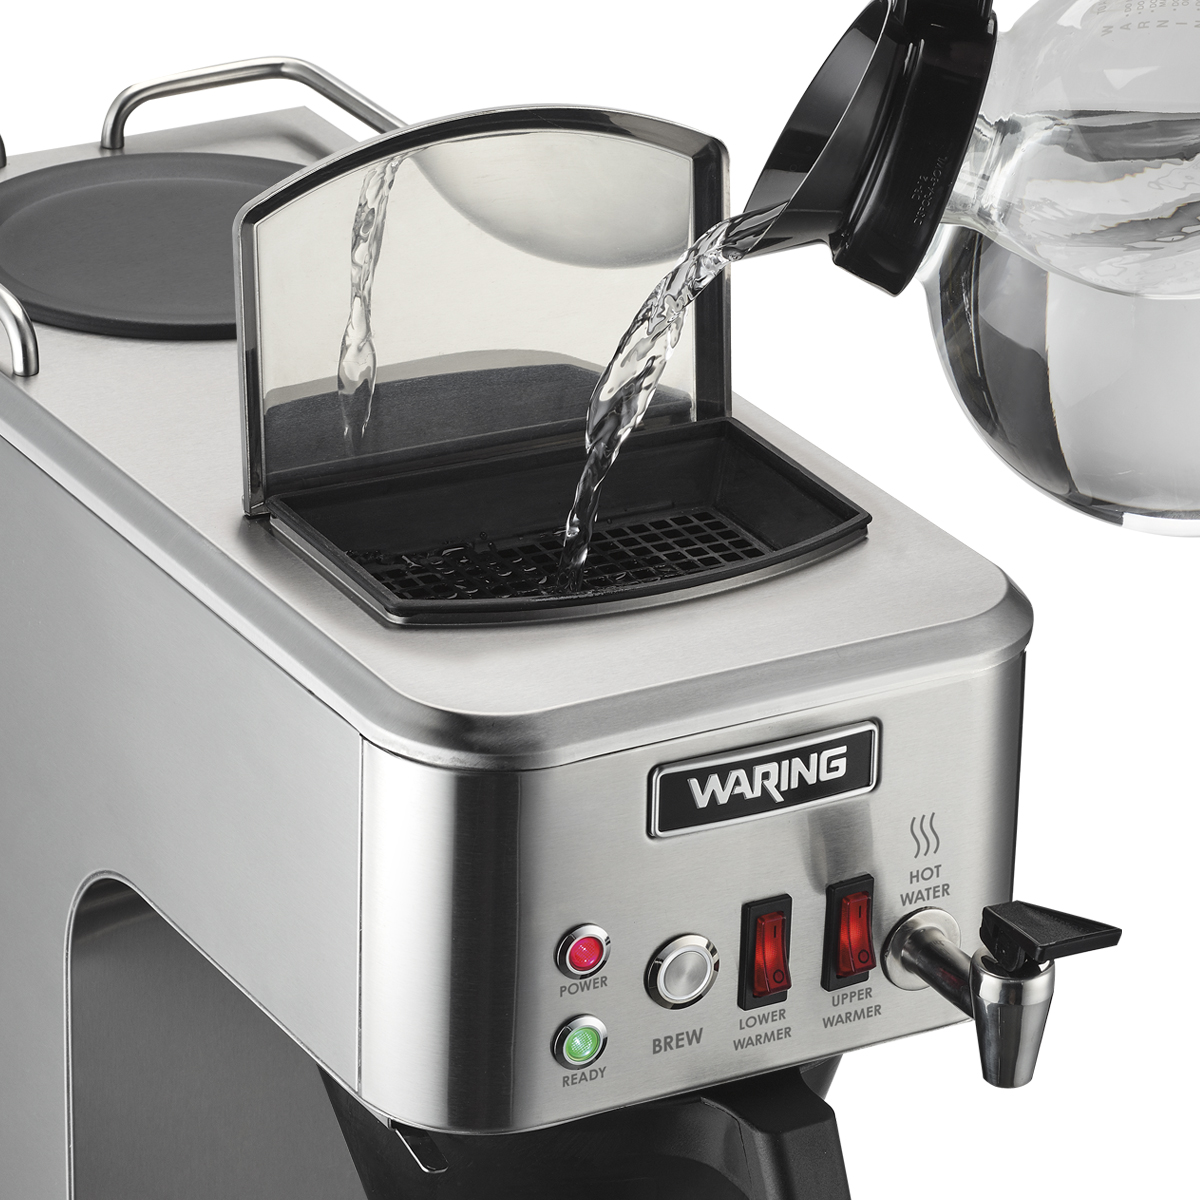 https://www.waringcommercialproducts.com/files/products/wcm50p-cafe-deco-automatic-coffee-brewer-inset-3-1200x1200.jpg